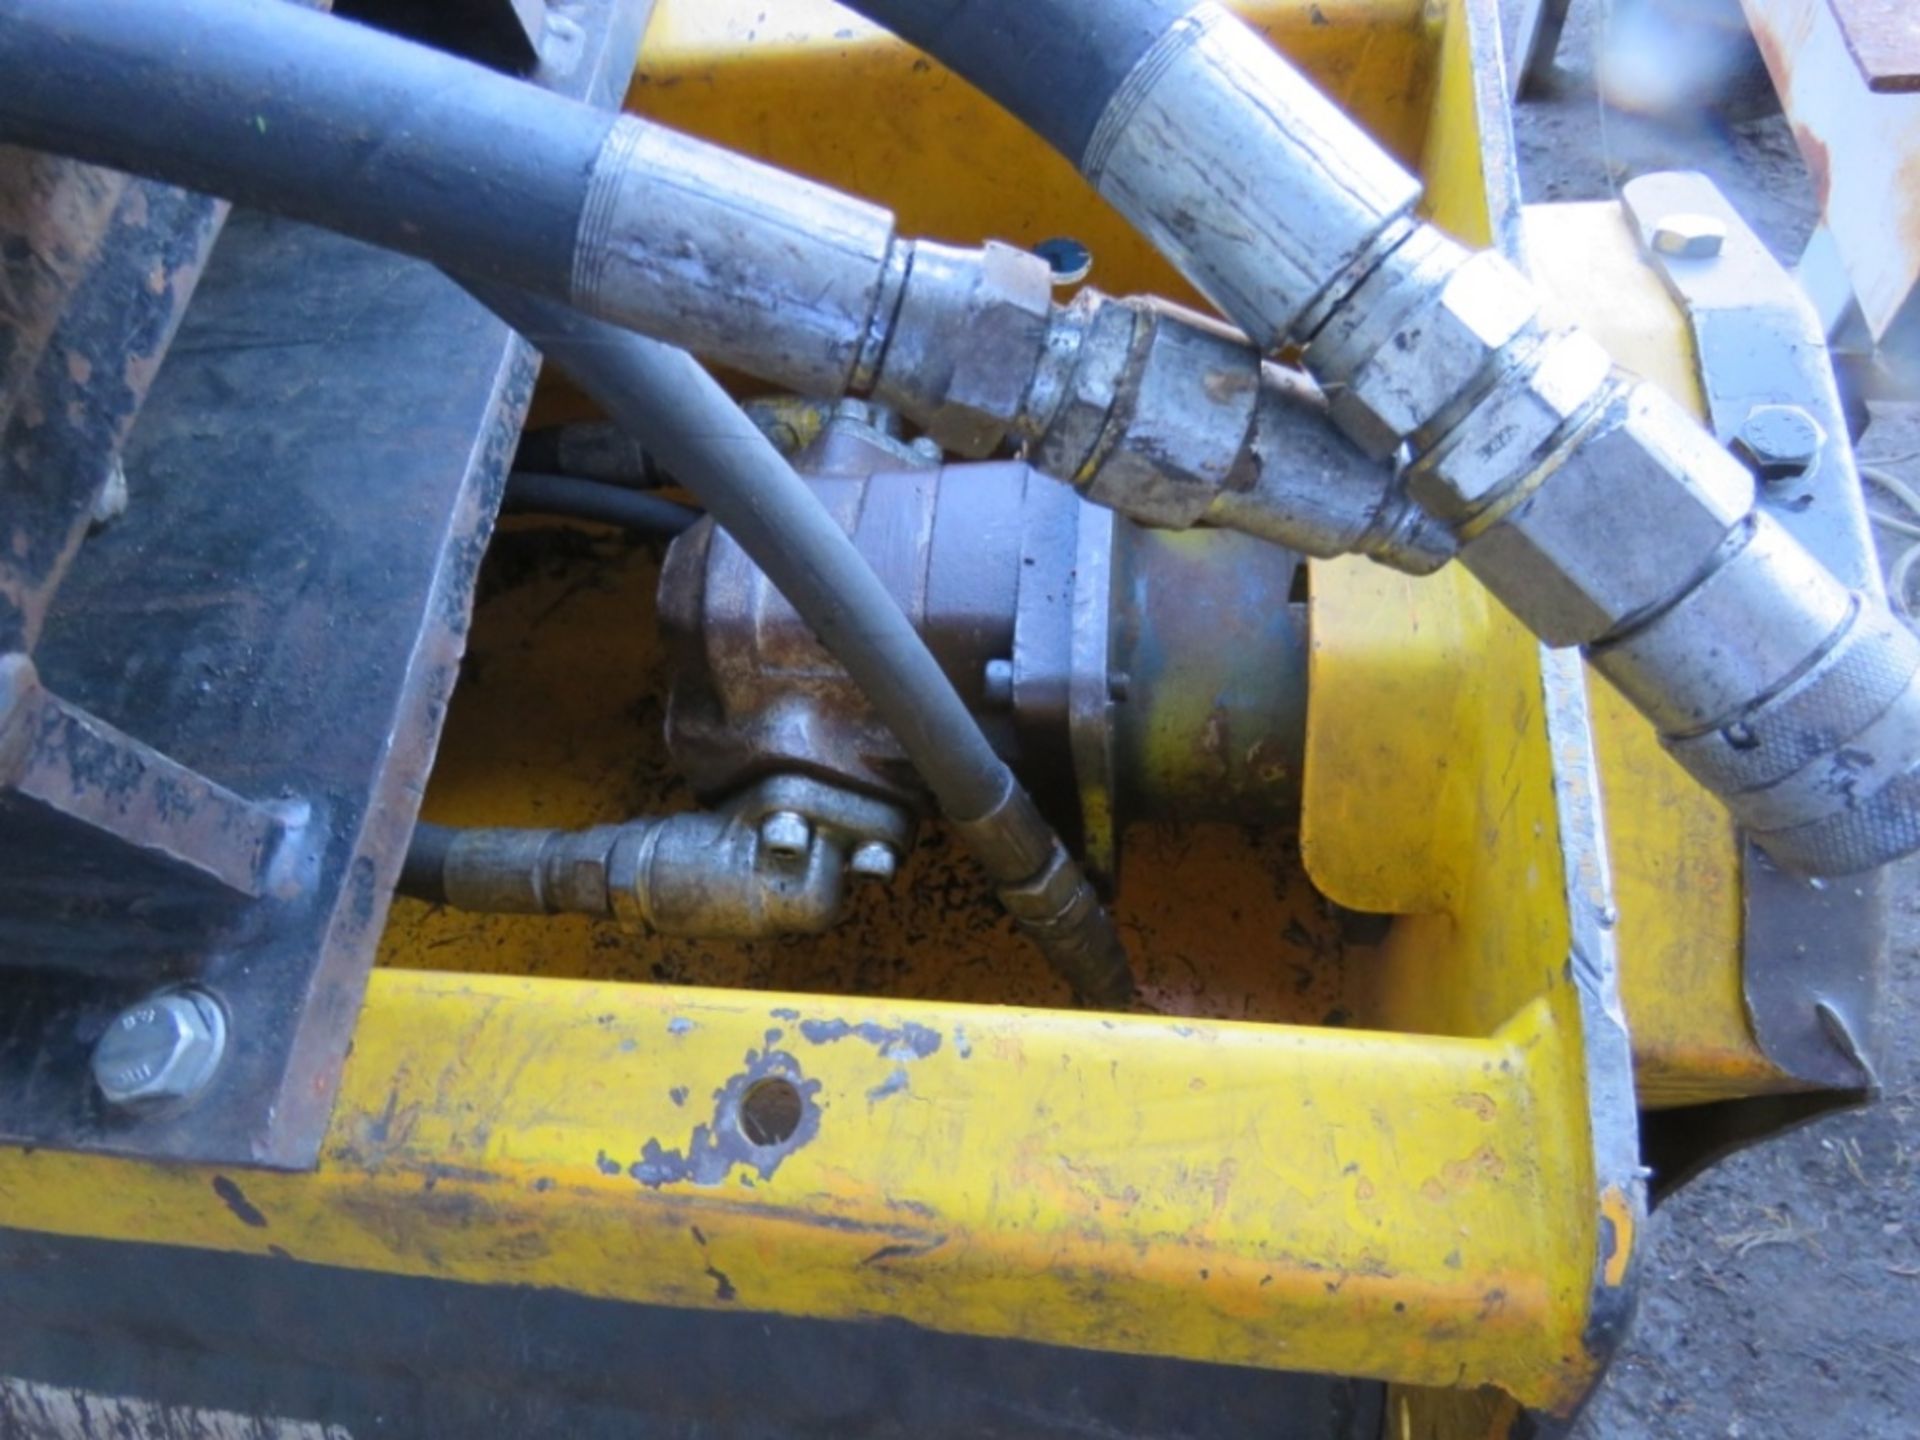 FEMAC EXCAVATOR MOUNTED HEAVY DUTY FLAIL HEAD ON 80MM PINS. UNTESTED, CONDITION UNKNOWN. - Image 7 of 10